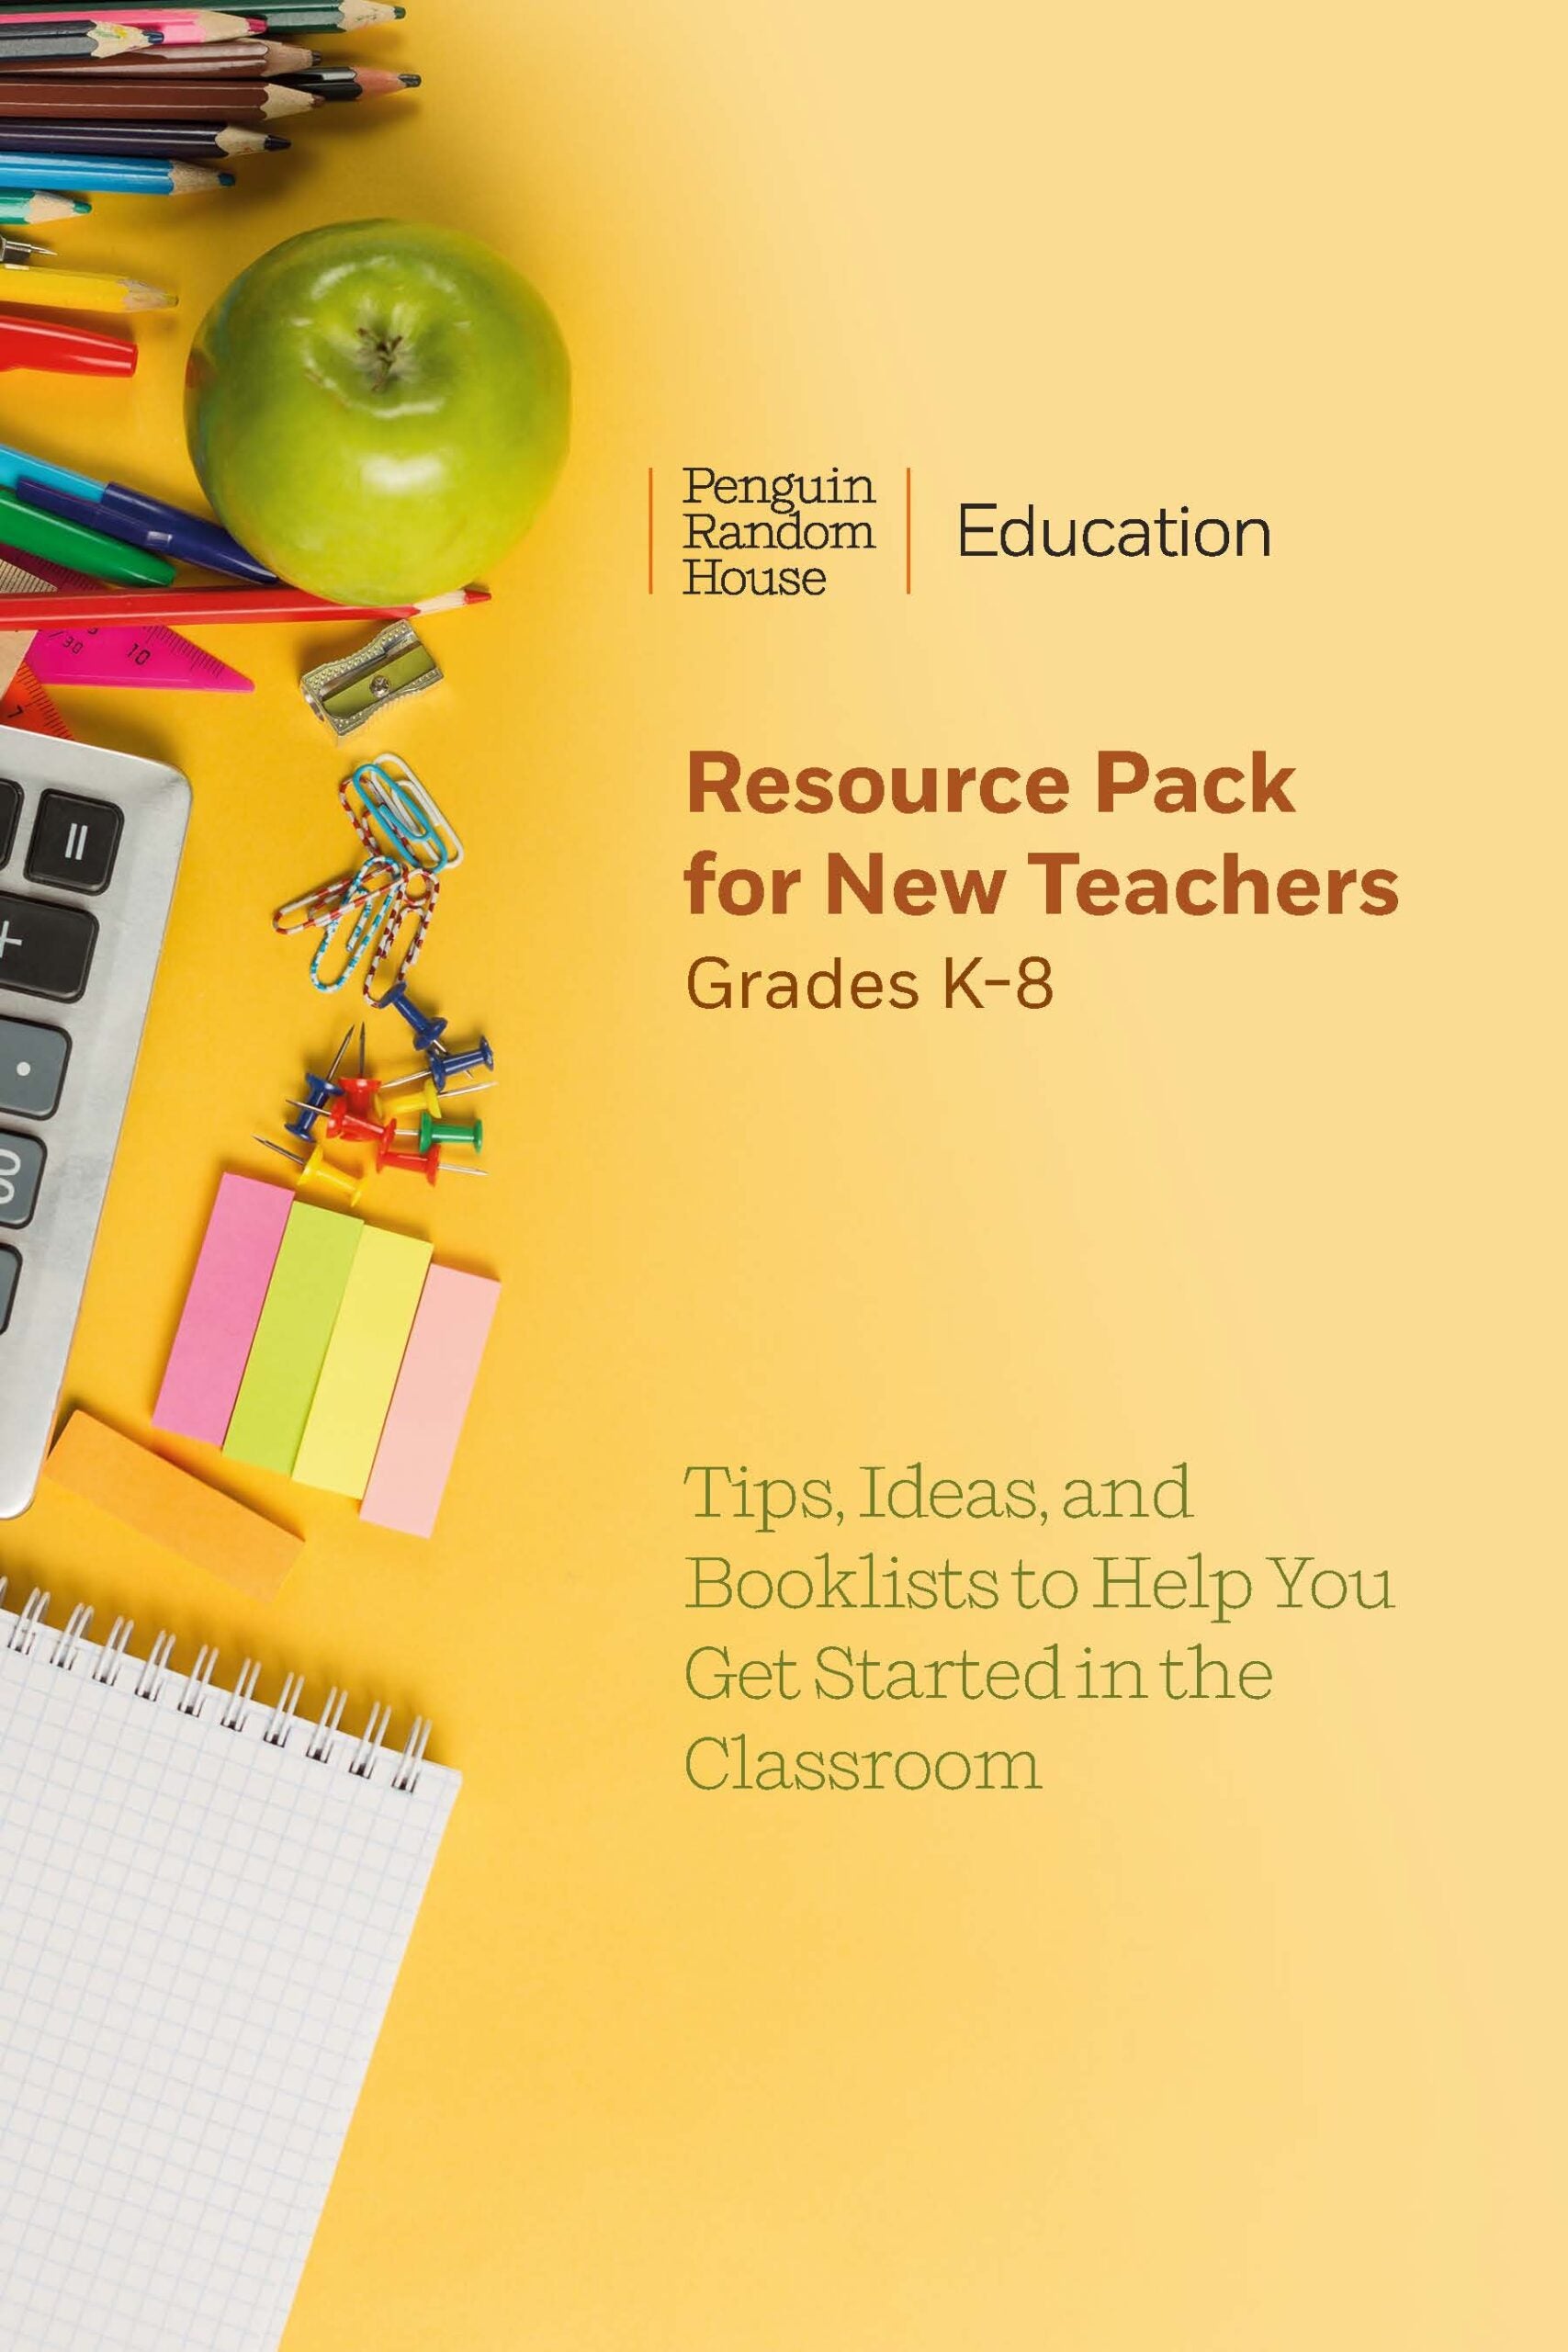 Resource Pack for New Teachers